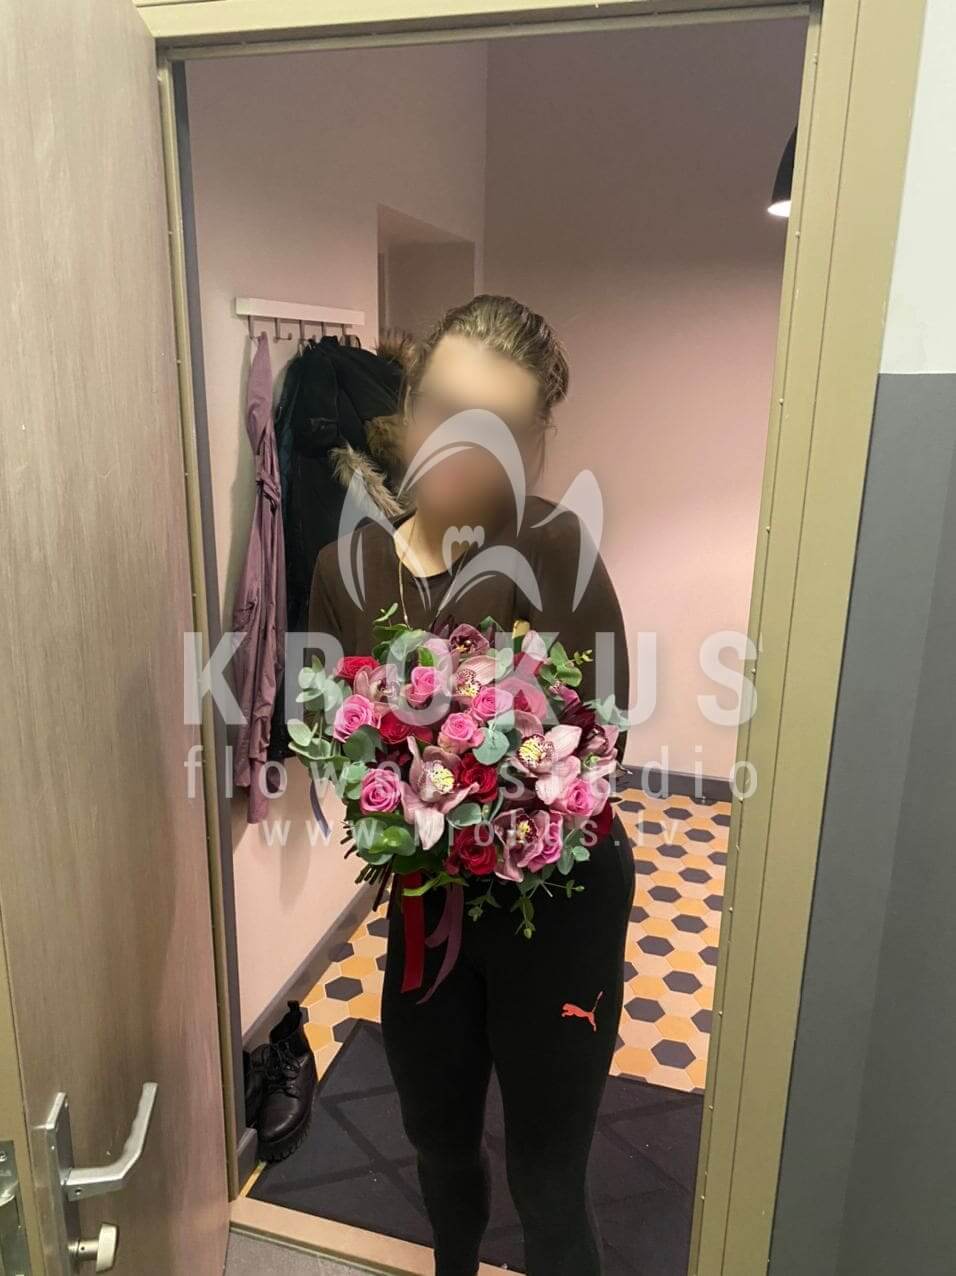 Deliver flowers to Rīga (pink rosesorchidsgum treeleucadendronred roses)